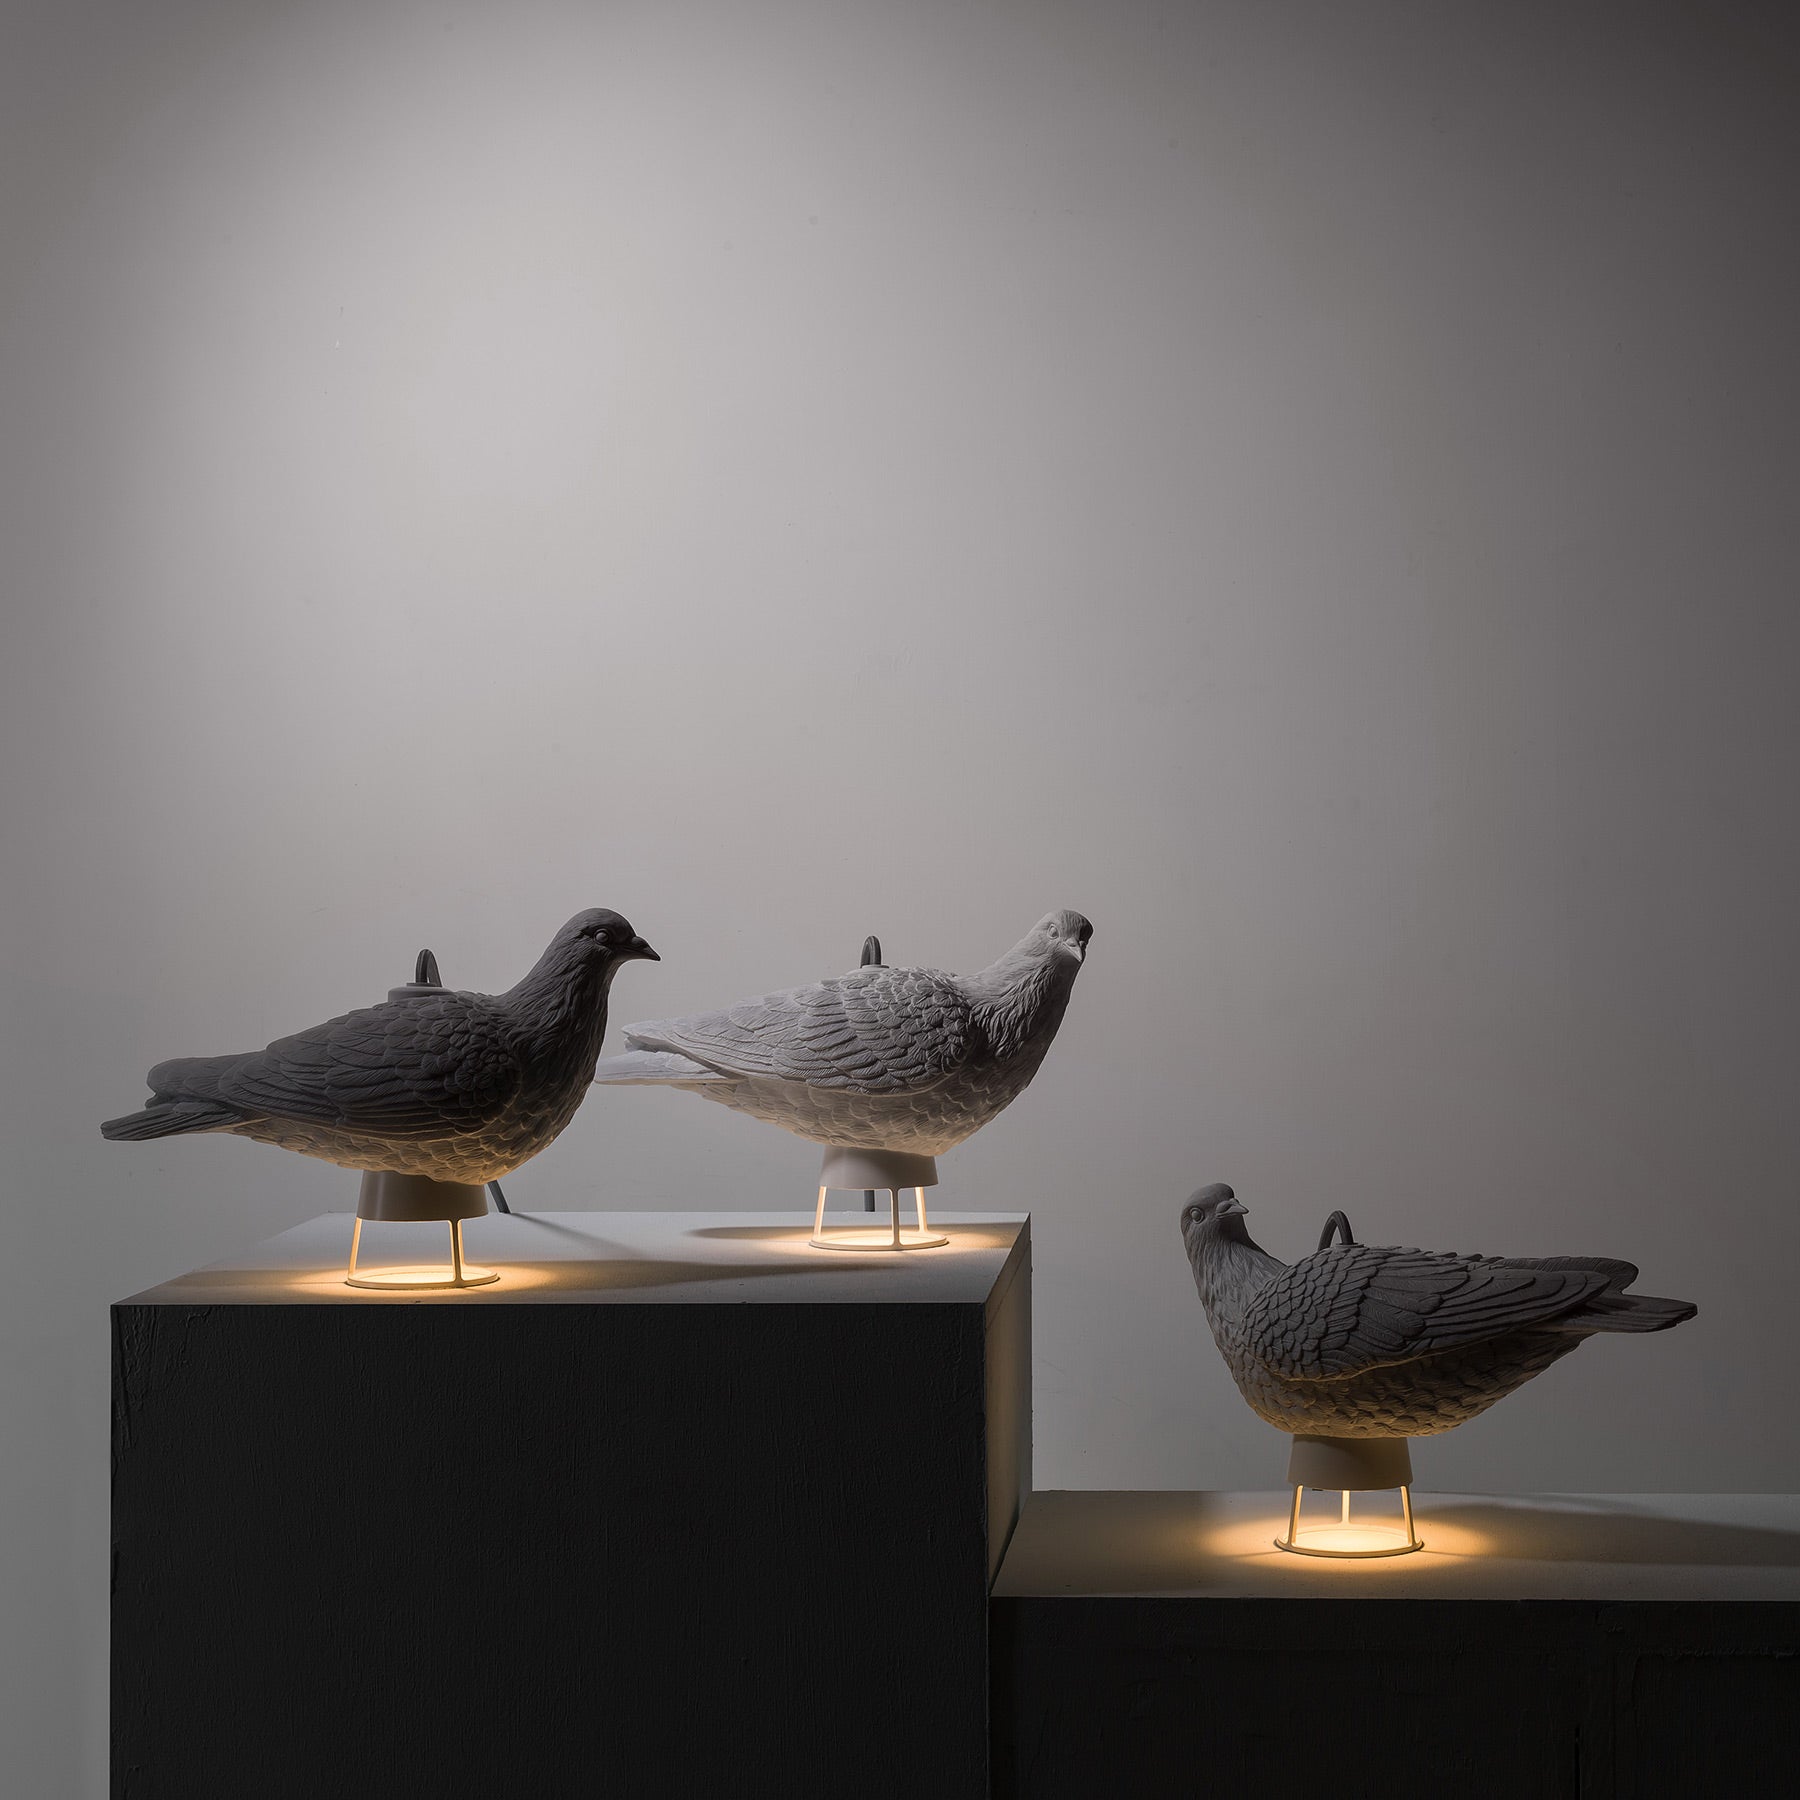 Bird Table Lamp with White Sculpture